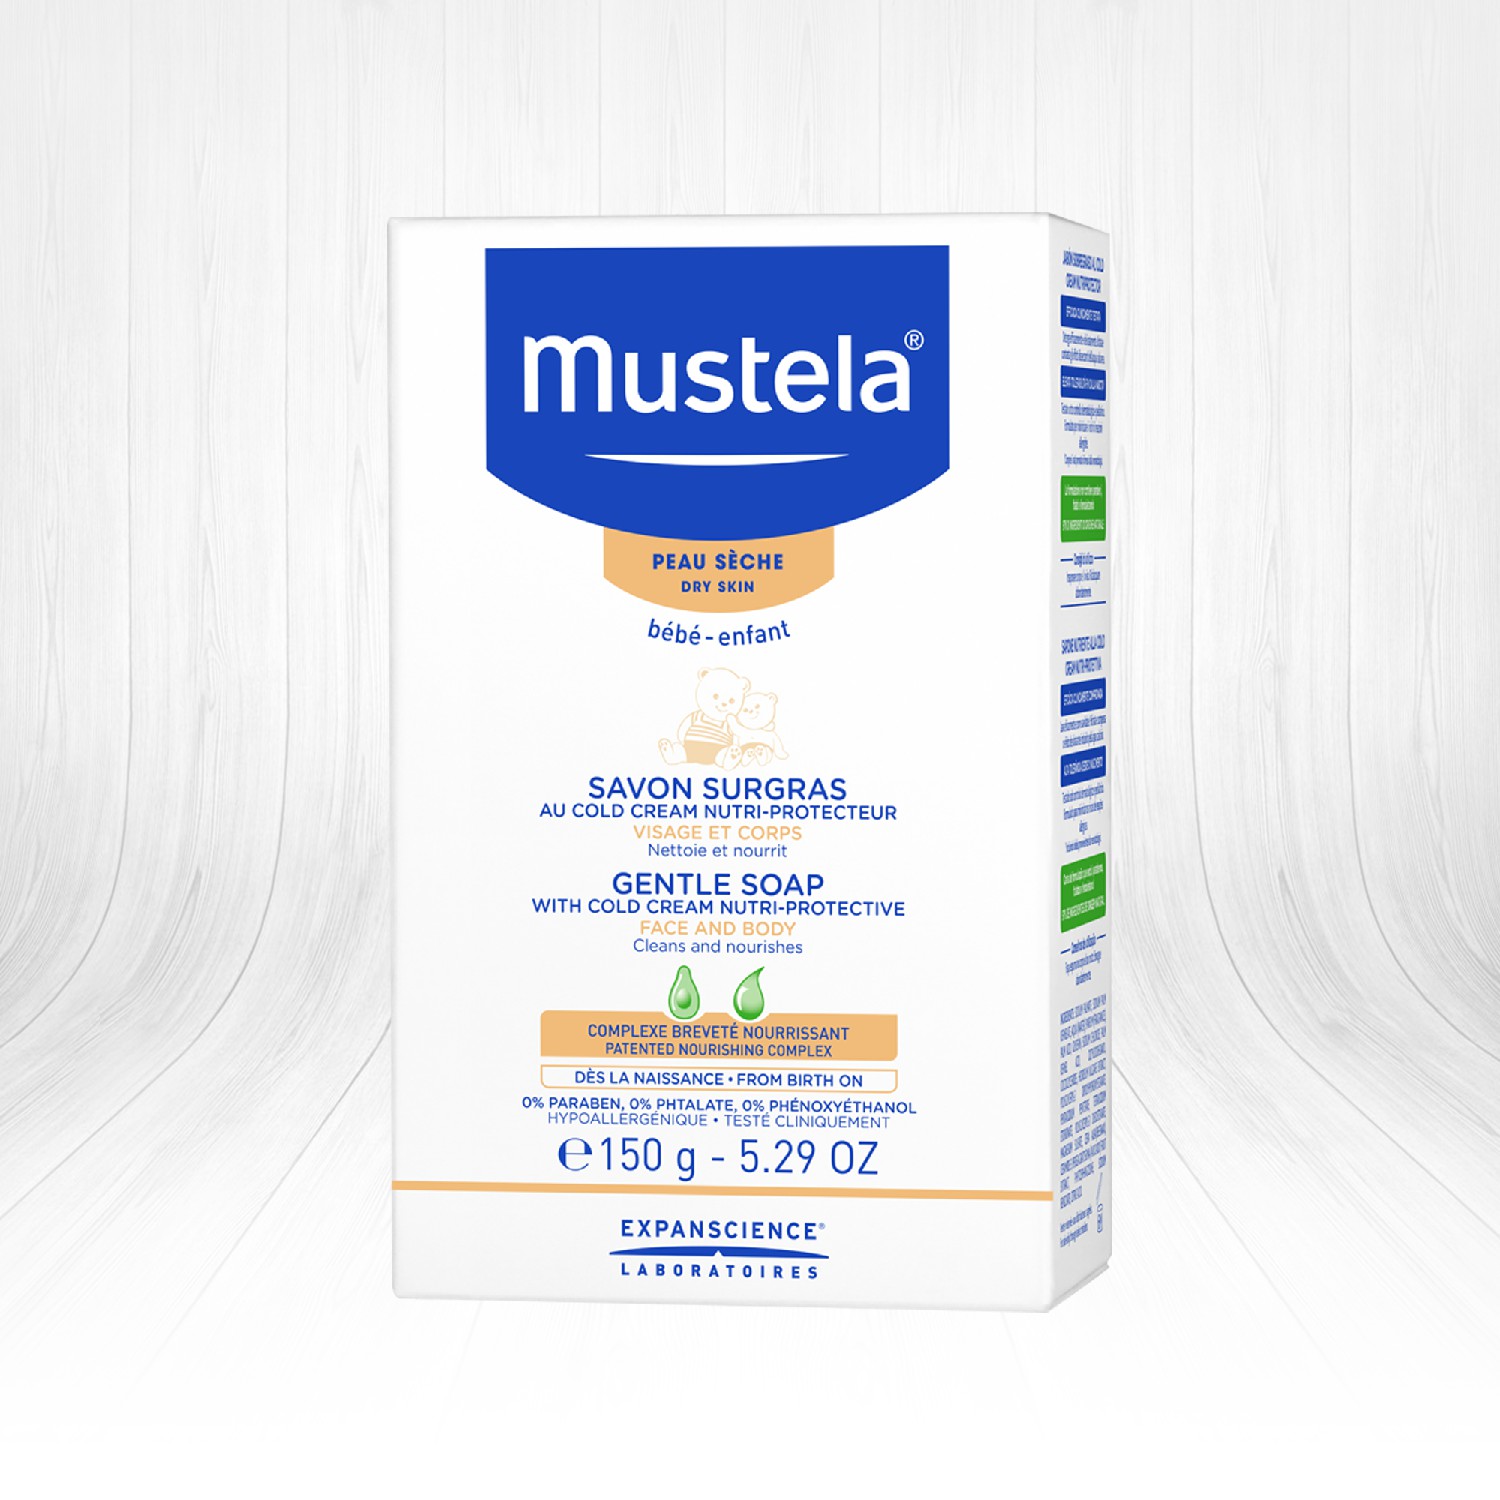 Mustela Gentle Soap With Cold Cream NutriProtective